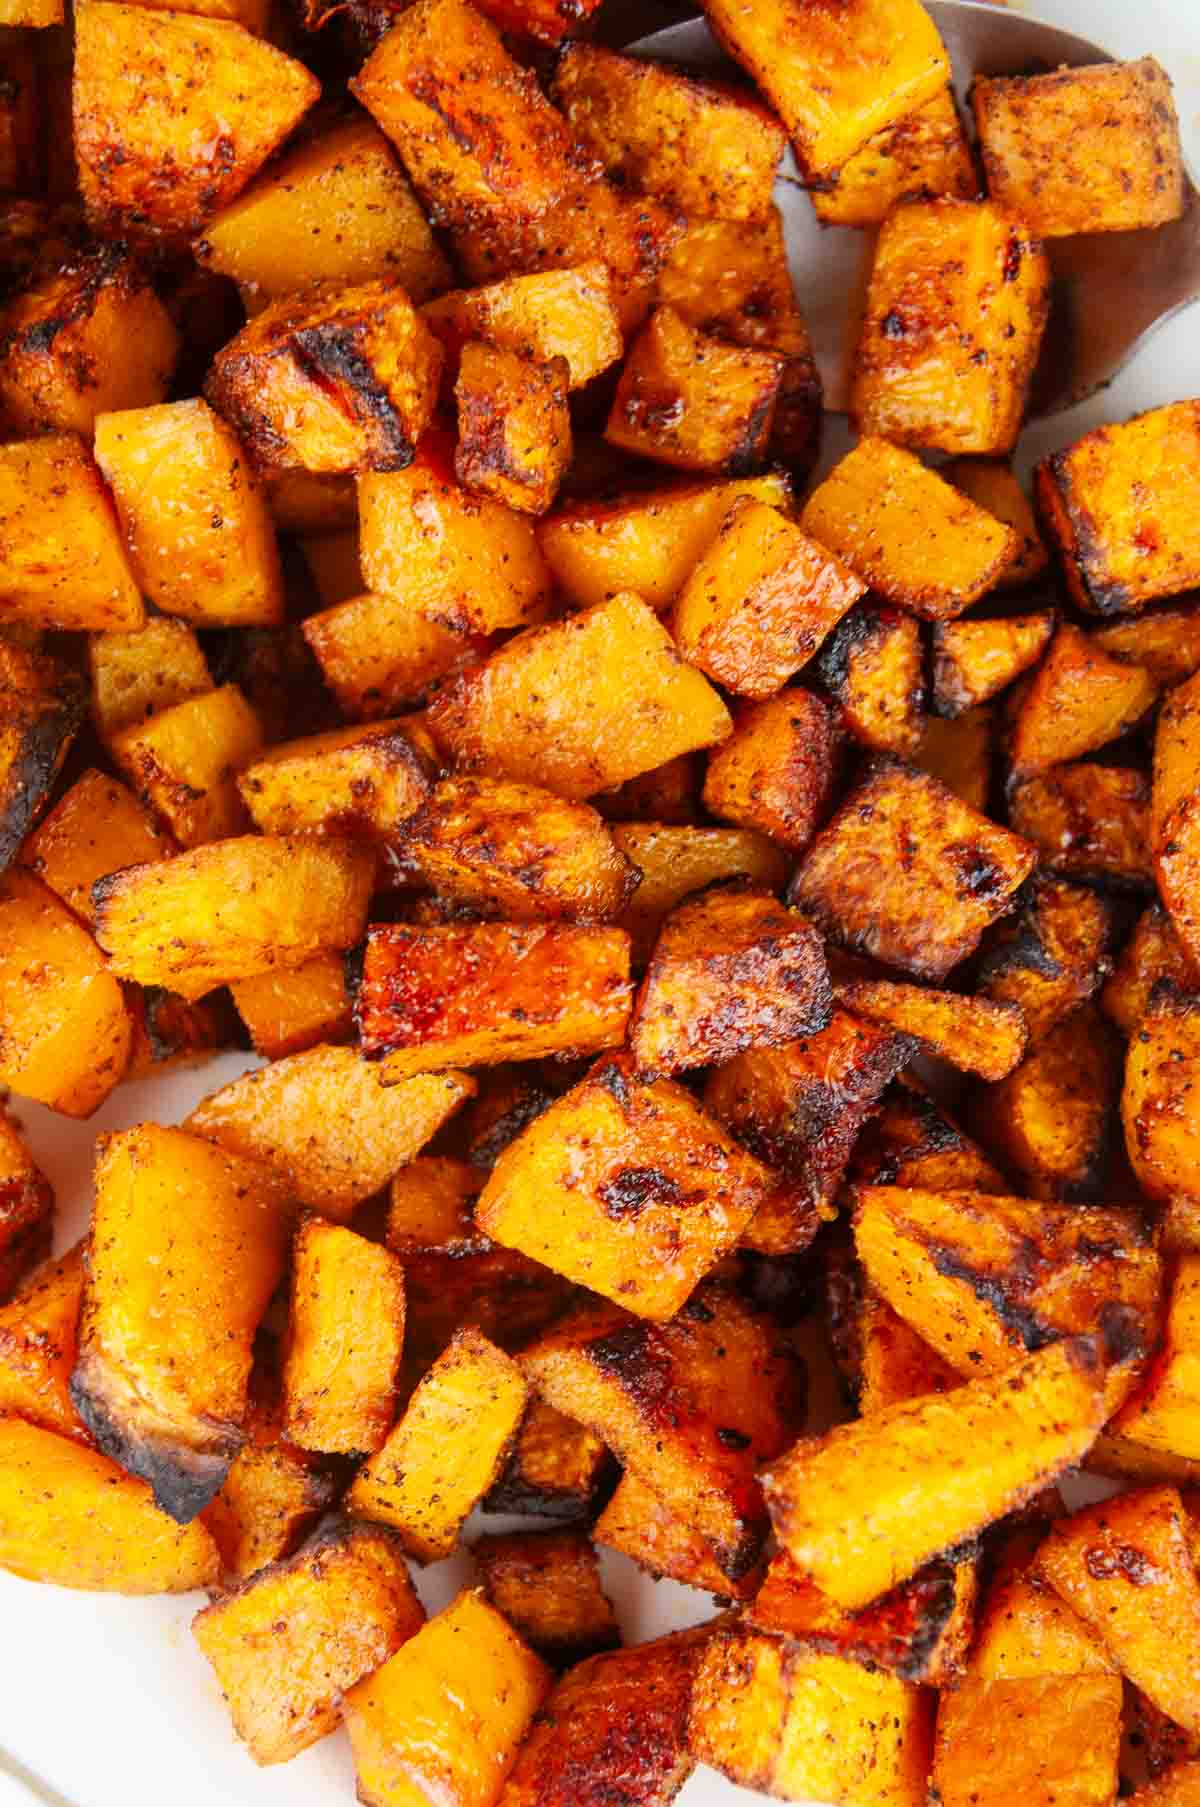 Roasted spice butternut squash is a savory butternut squash recipe with bold flavors like chili powder and garlic. This is a standout variation on traditional sweet roasted squash recipes!